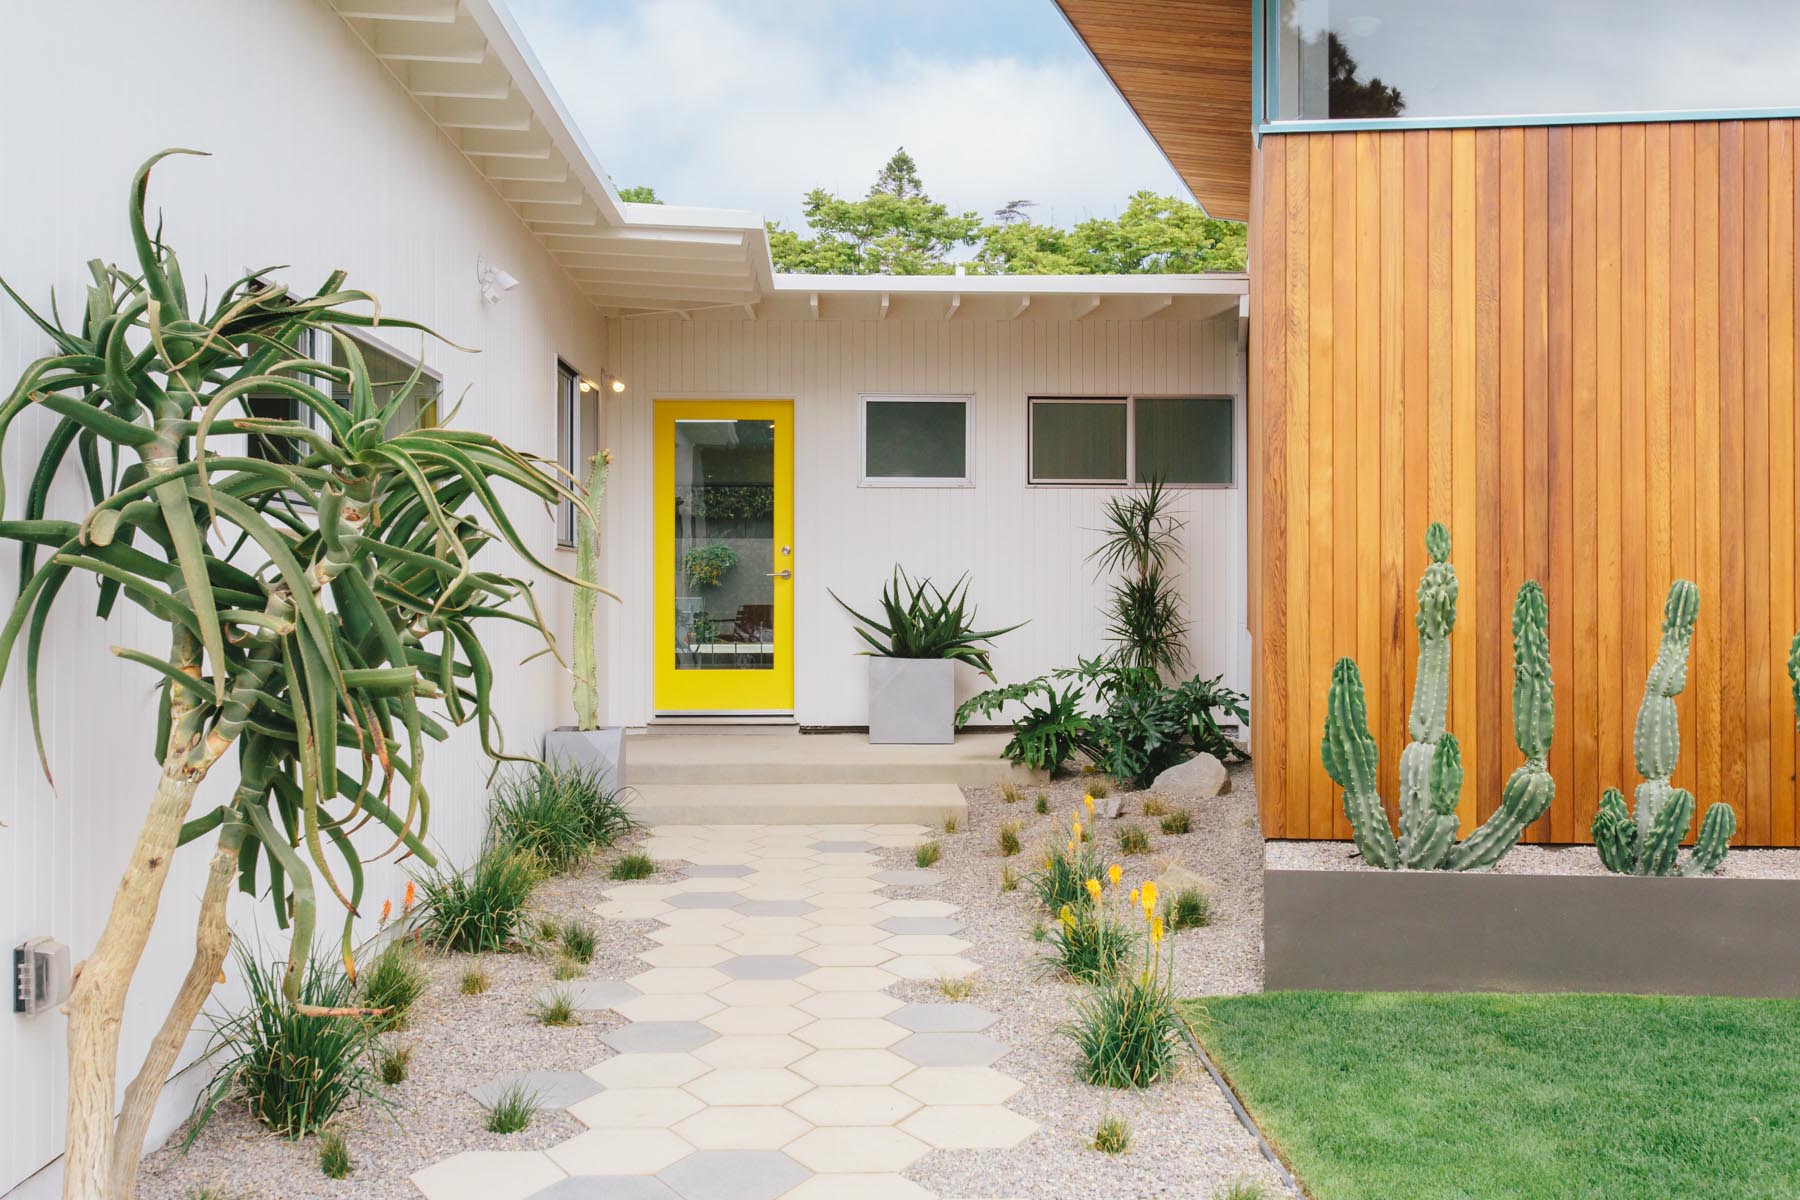 The updated exterior of this mid-century modern home showcases more usable green space and a permeable grass driveway, while an all new pavilion stands out by the tall-angled roofline with blue accents, and hexagonal pavers lead to the yellow front door.